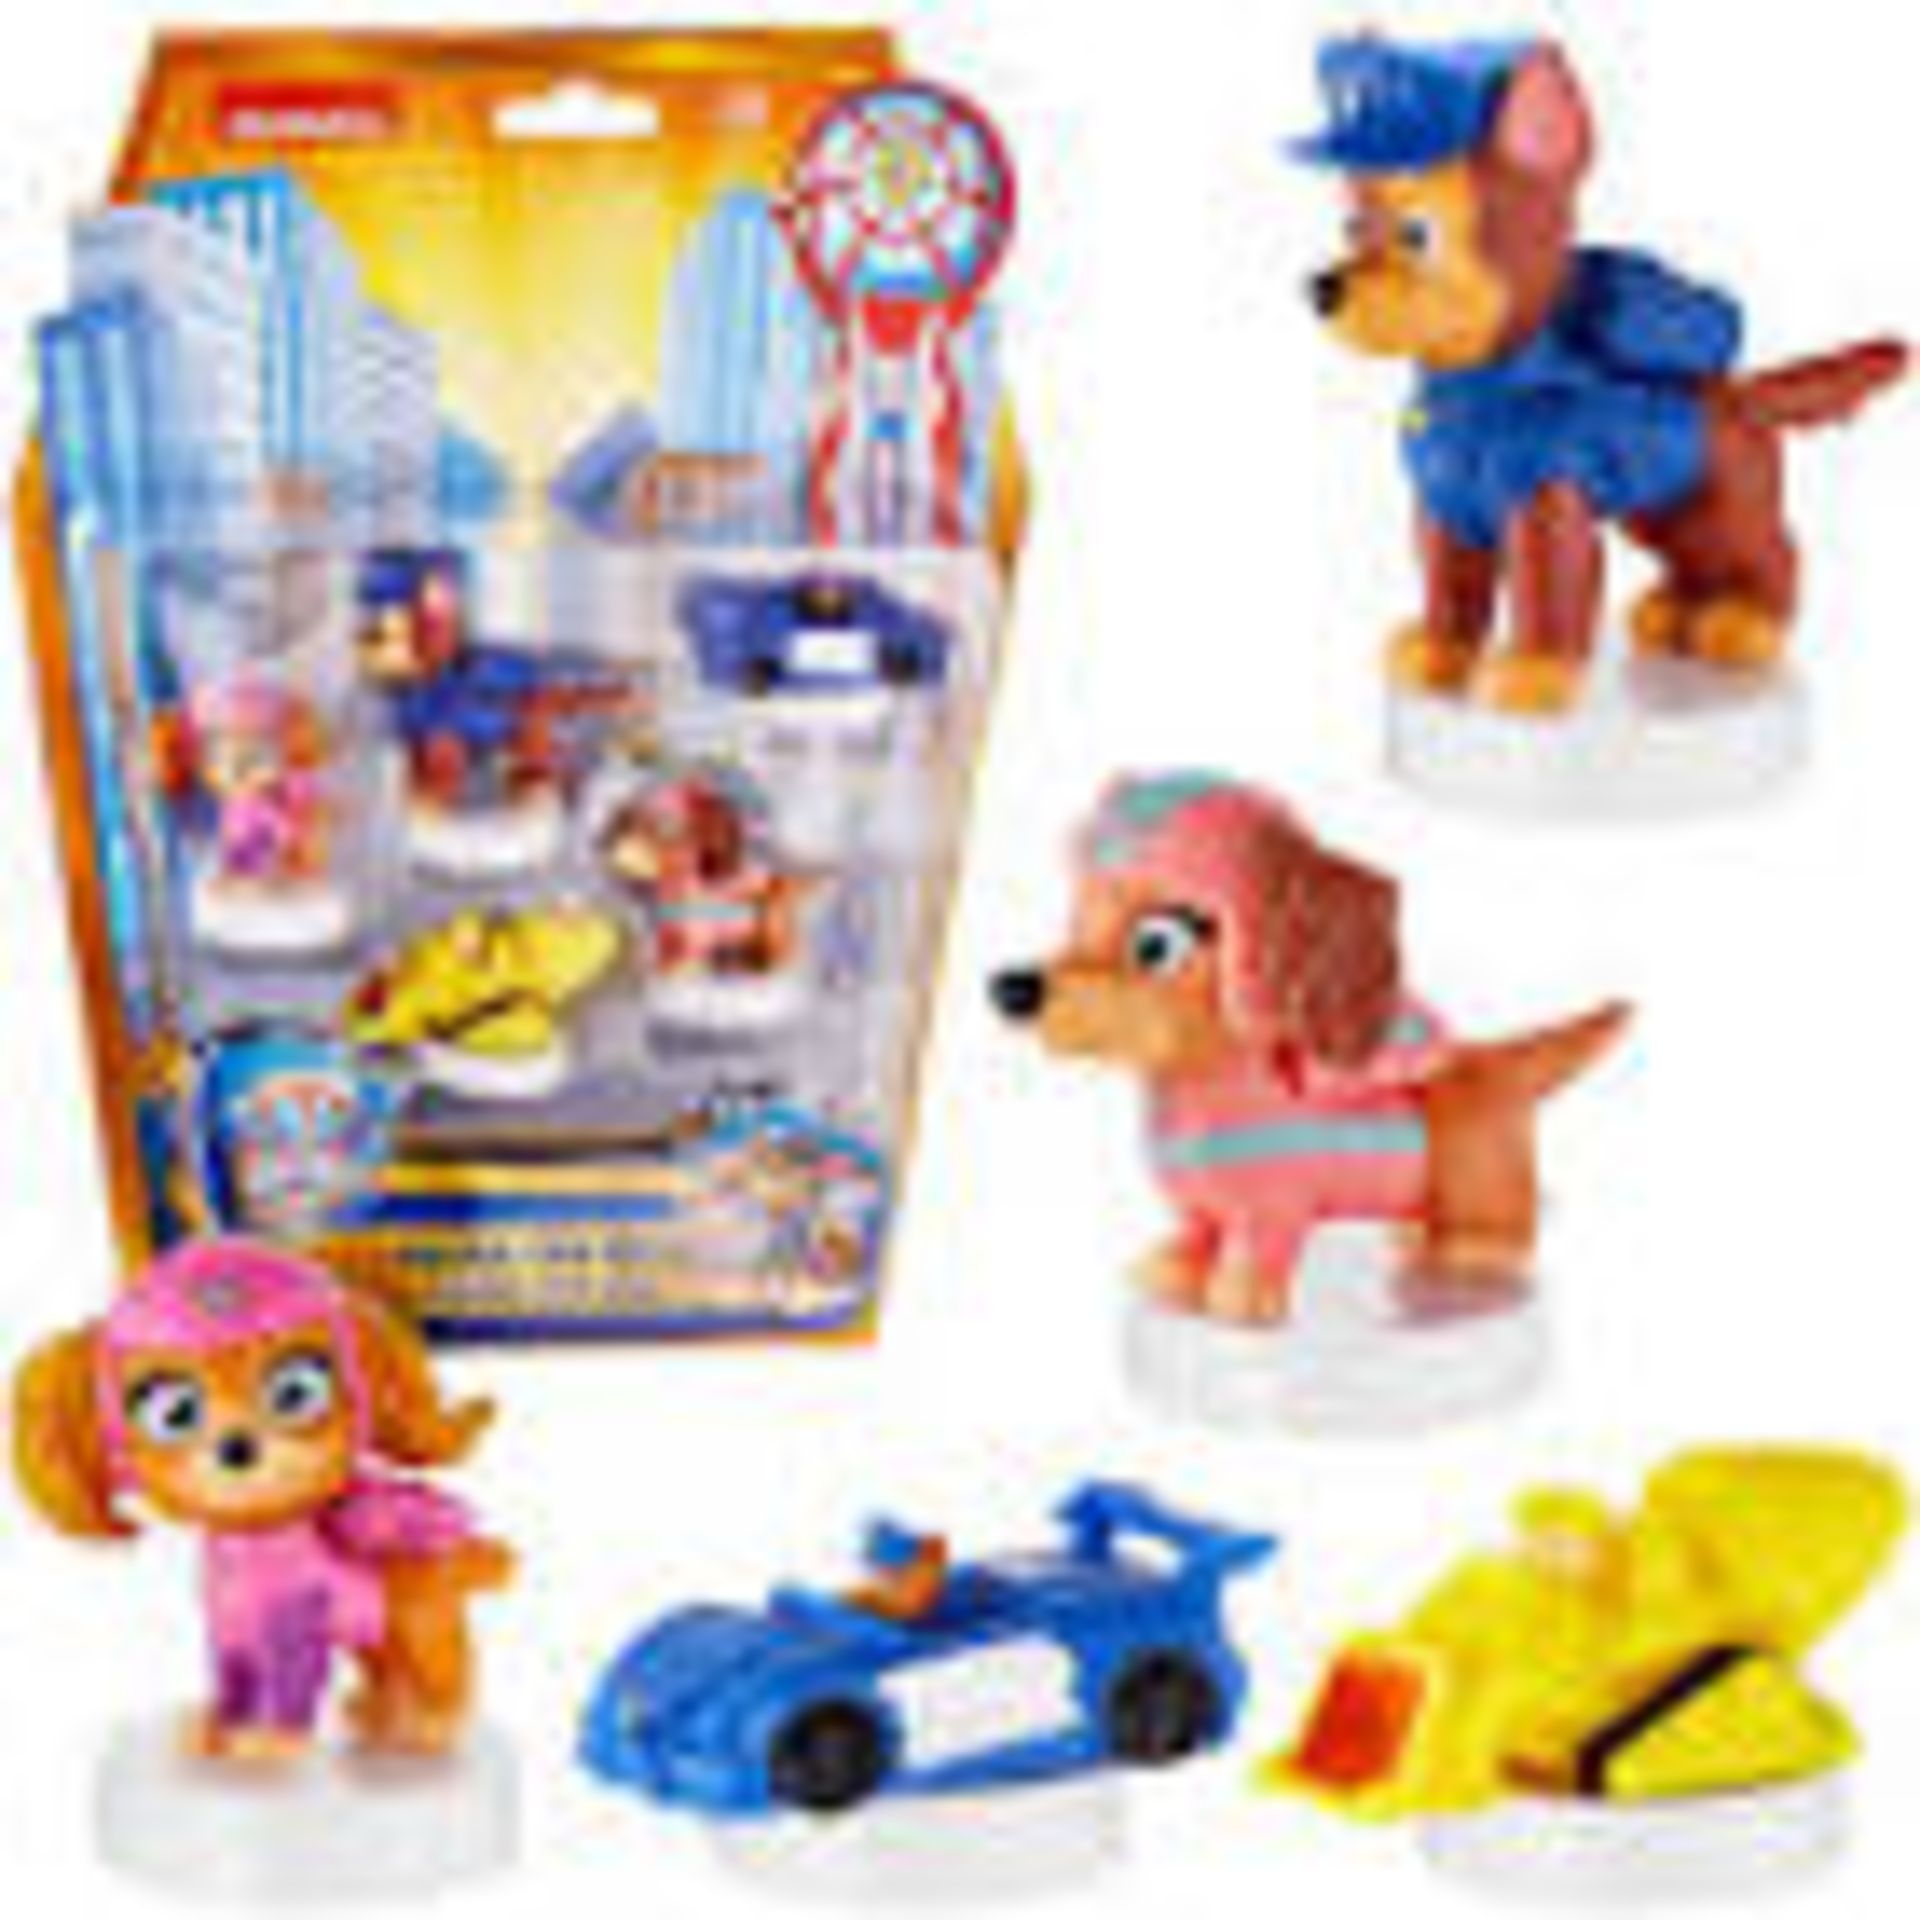 500 x Paw Patrol Toppers/Stamper Sets - Image 6 of 6